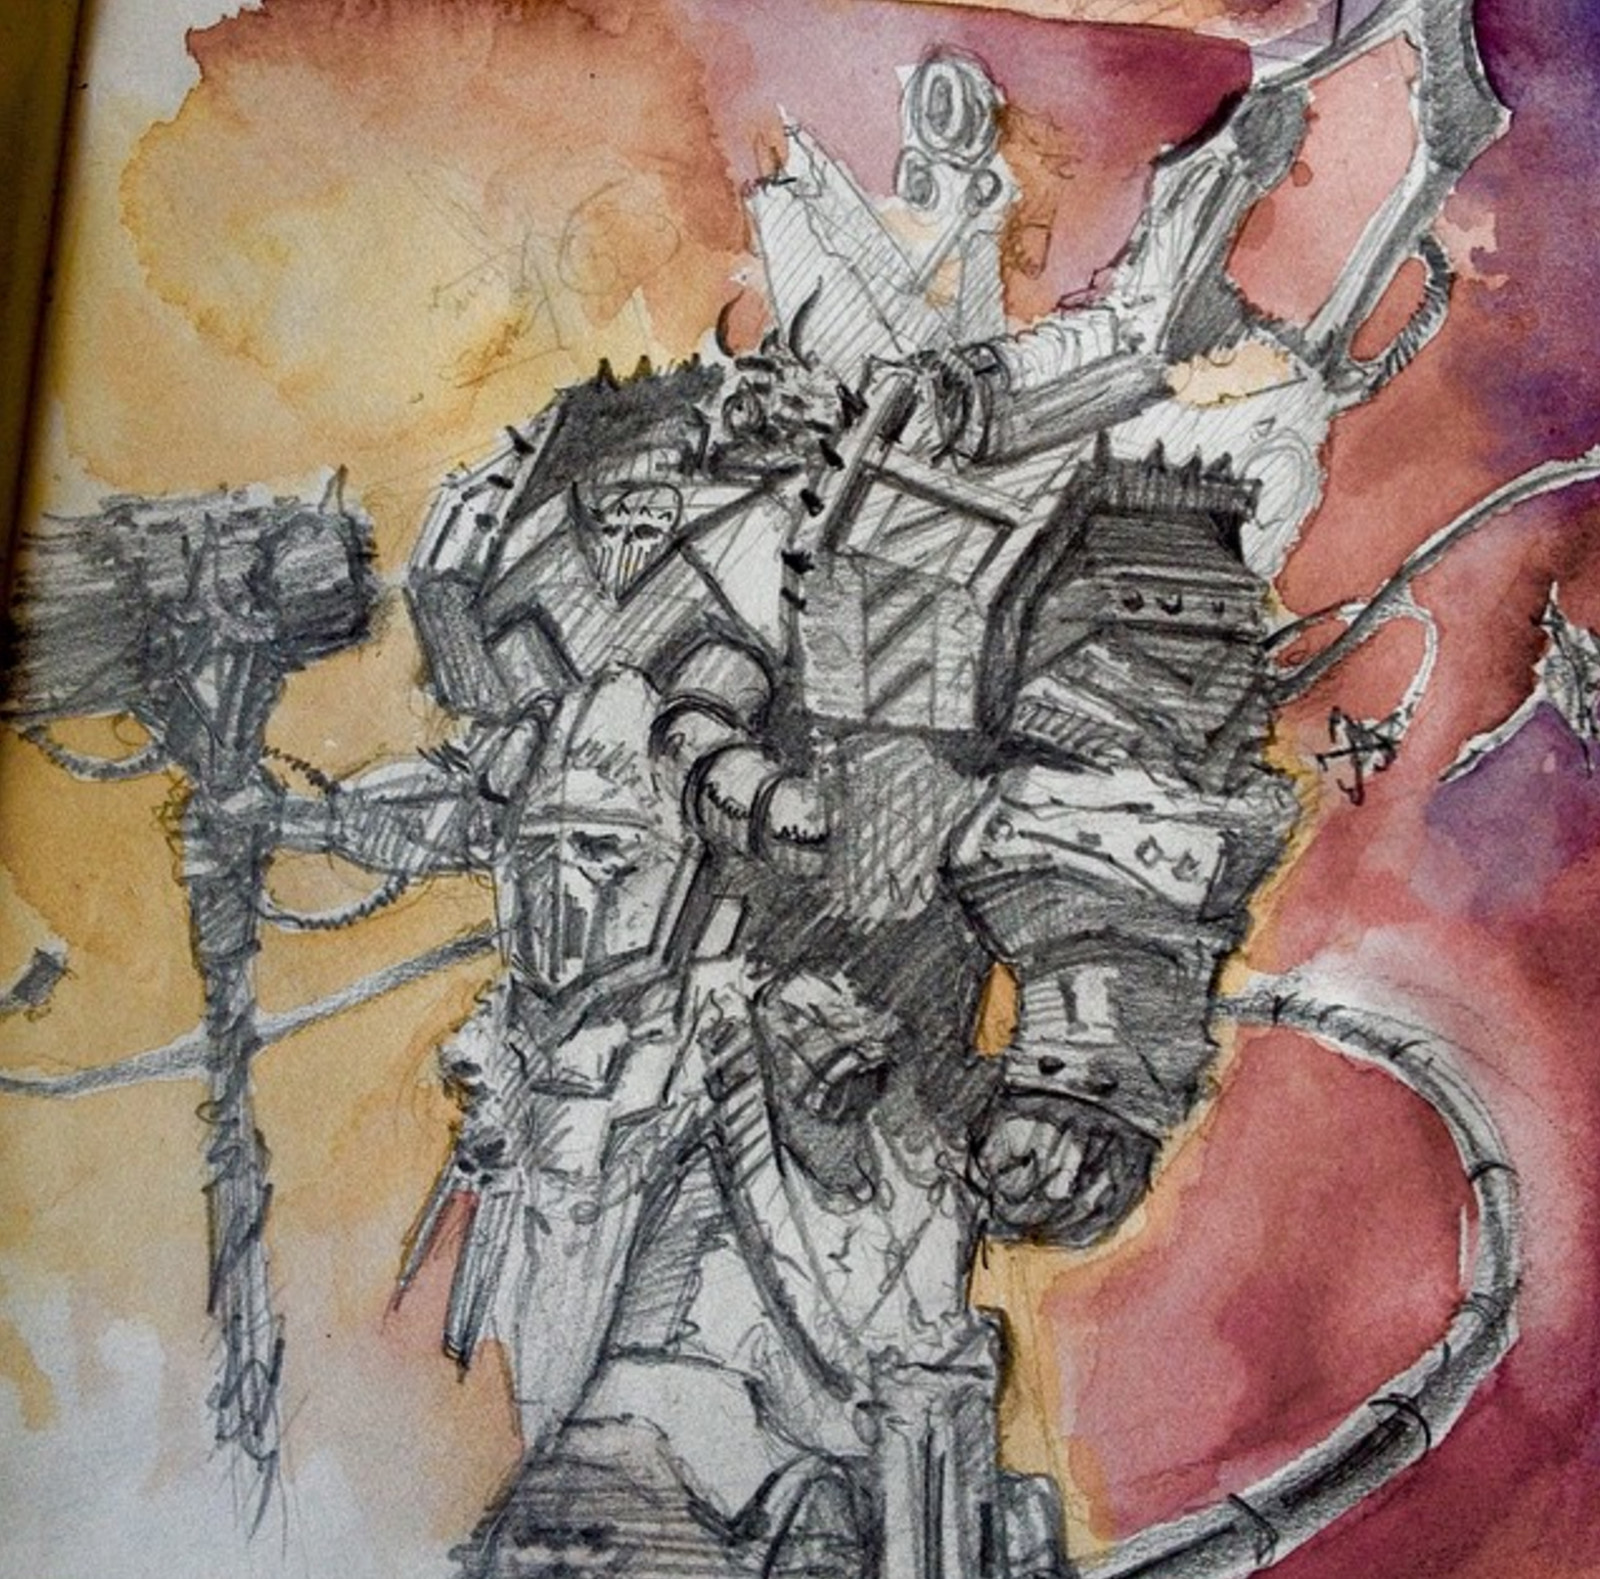 Iron Warrior sketch, with water colour no less!